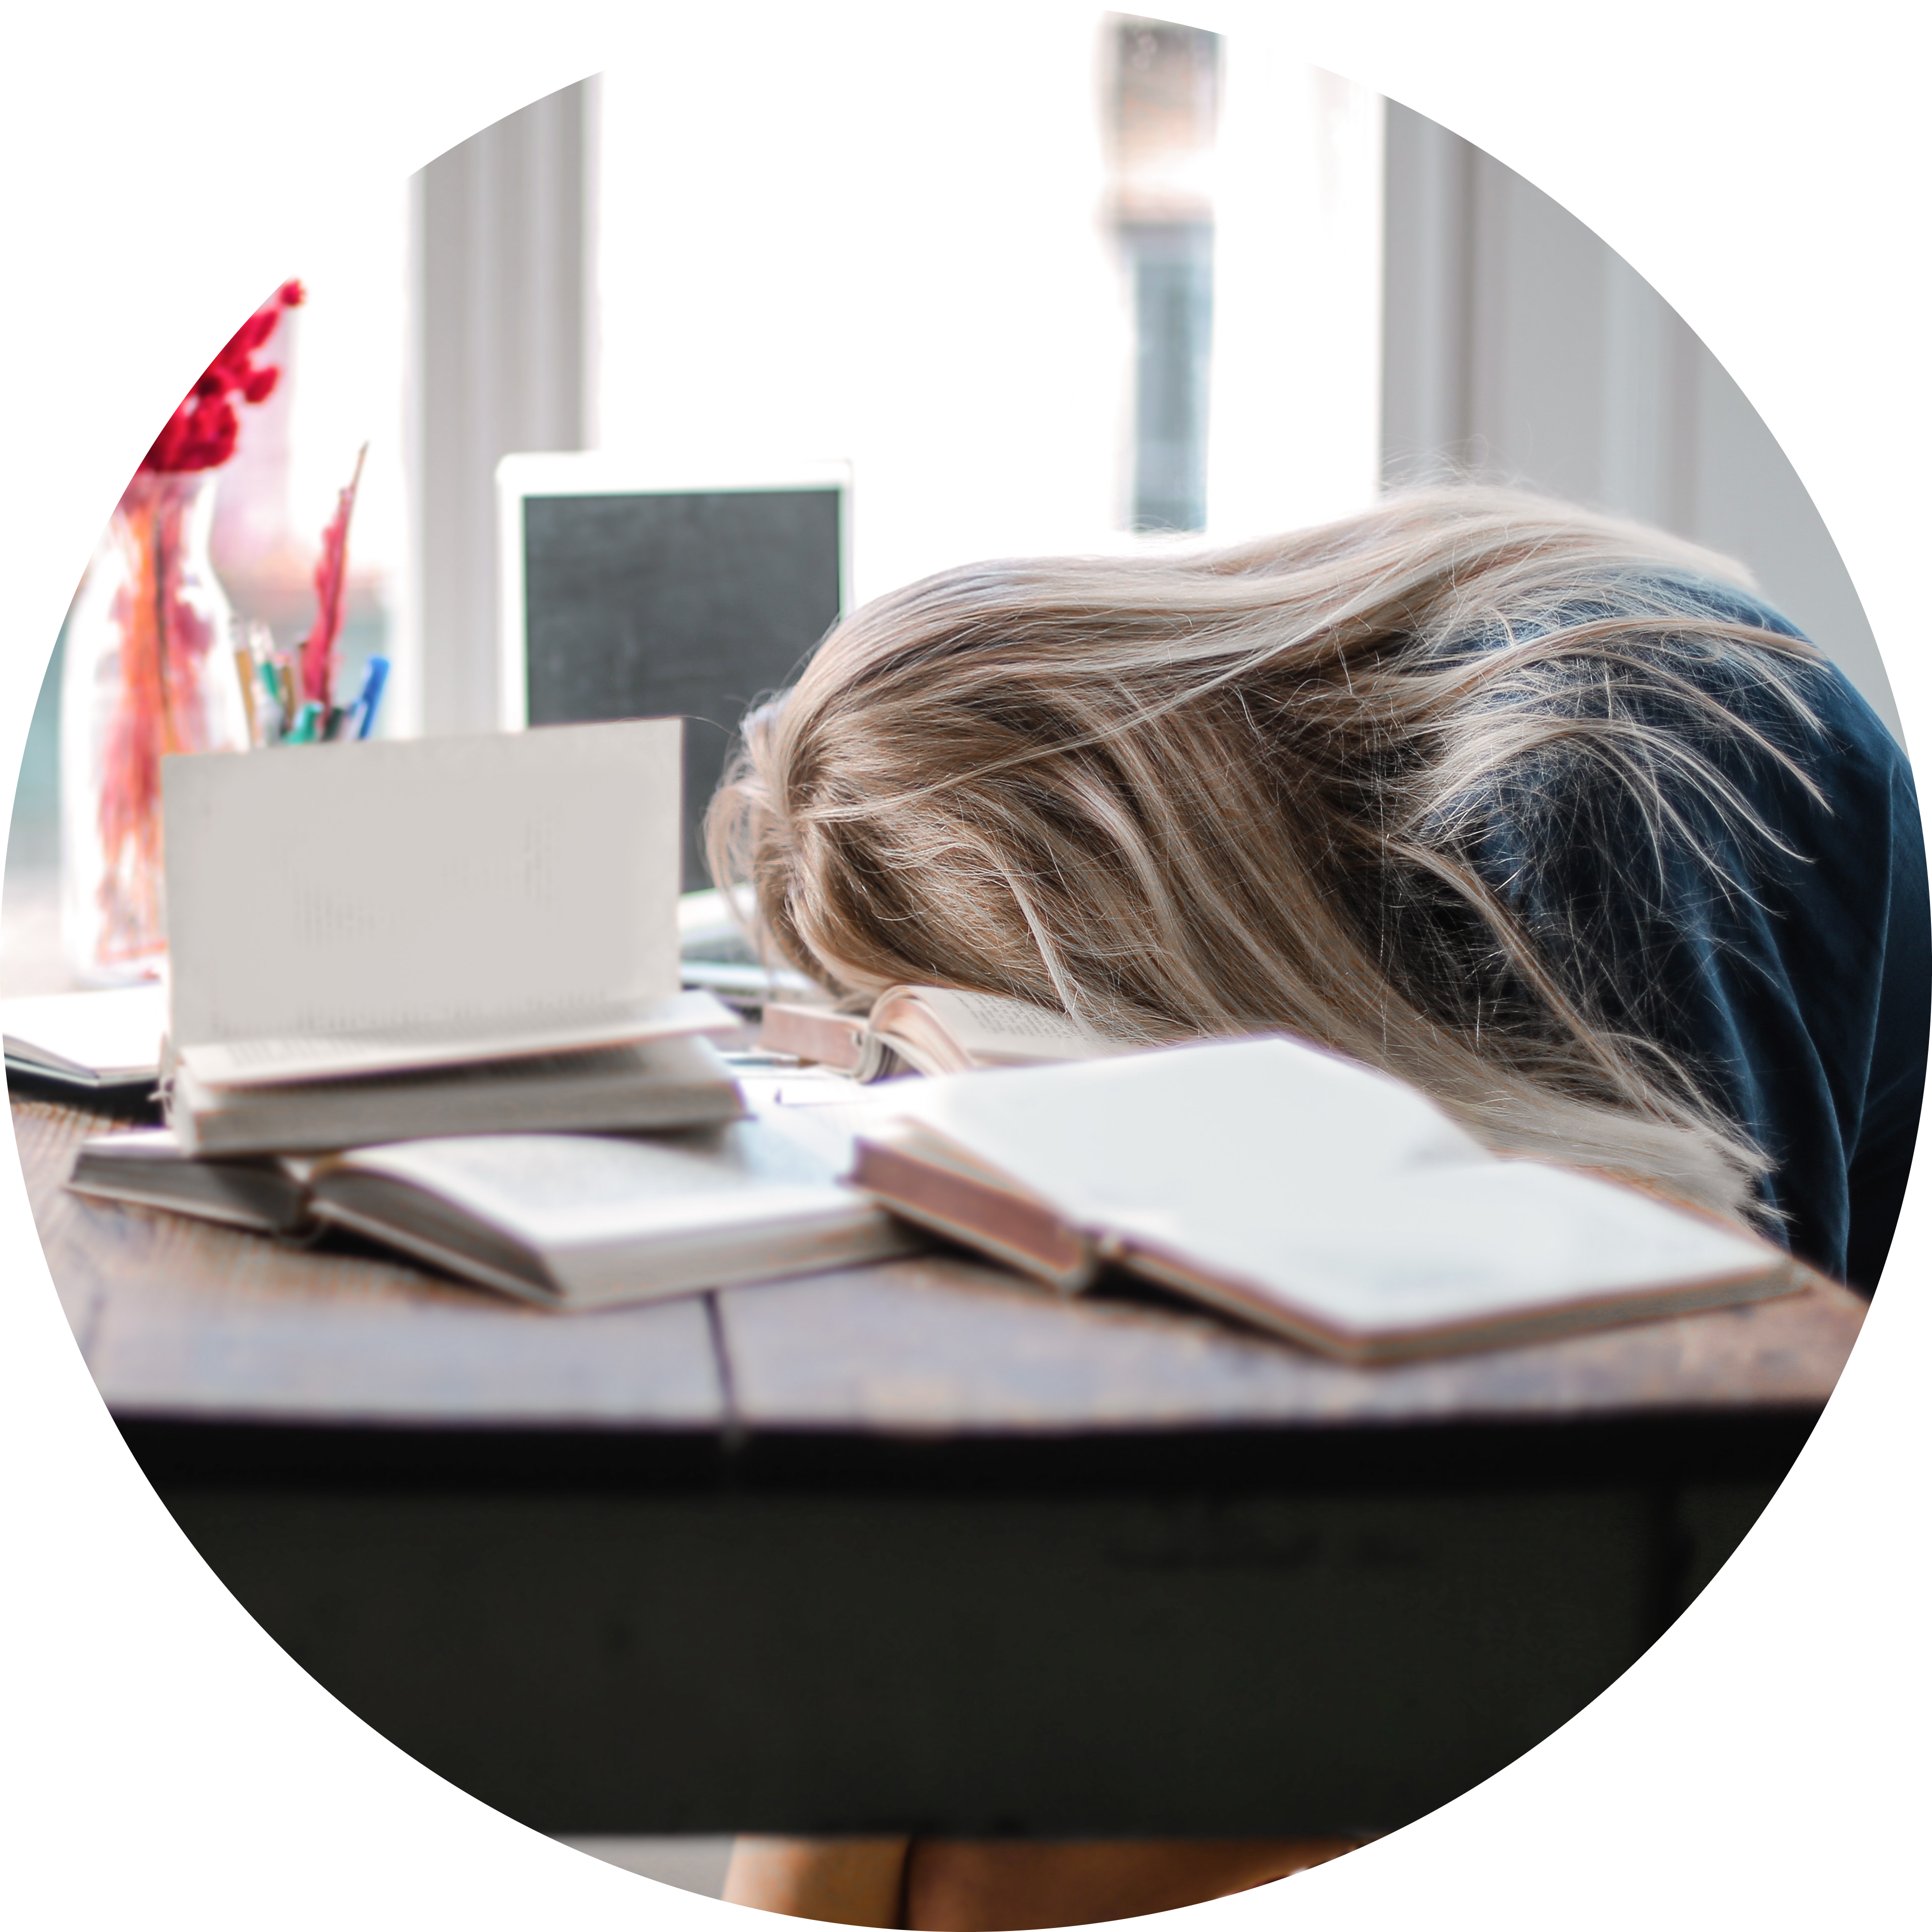 A girl with her head down on her desk, depressed by her poor mental health. She needs the courses and coaching Psycophi has to offer!